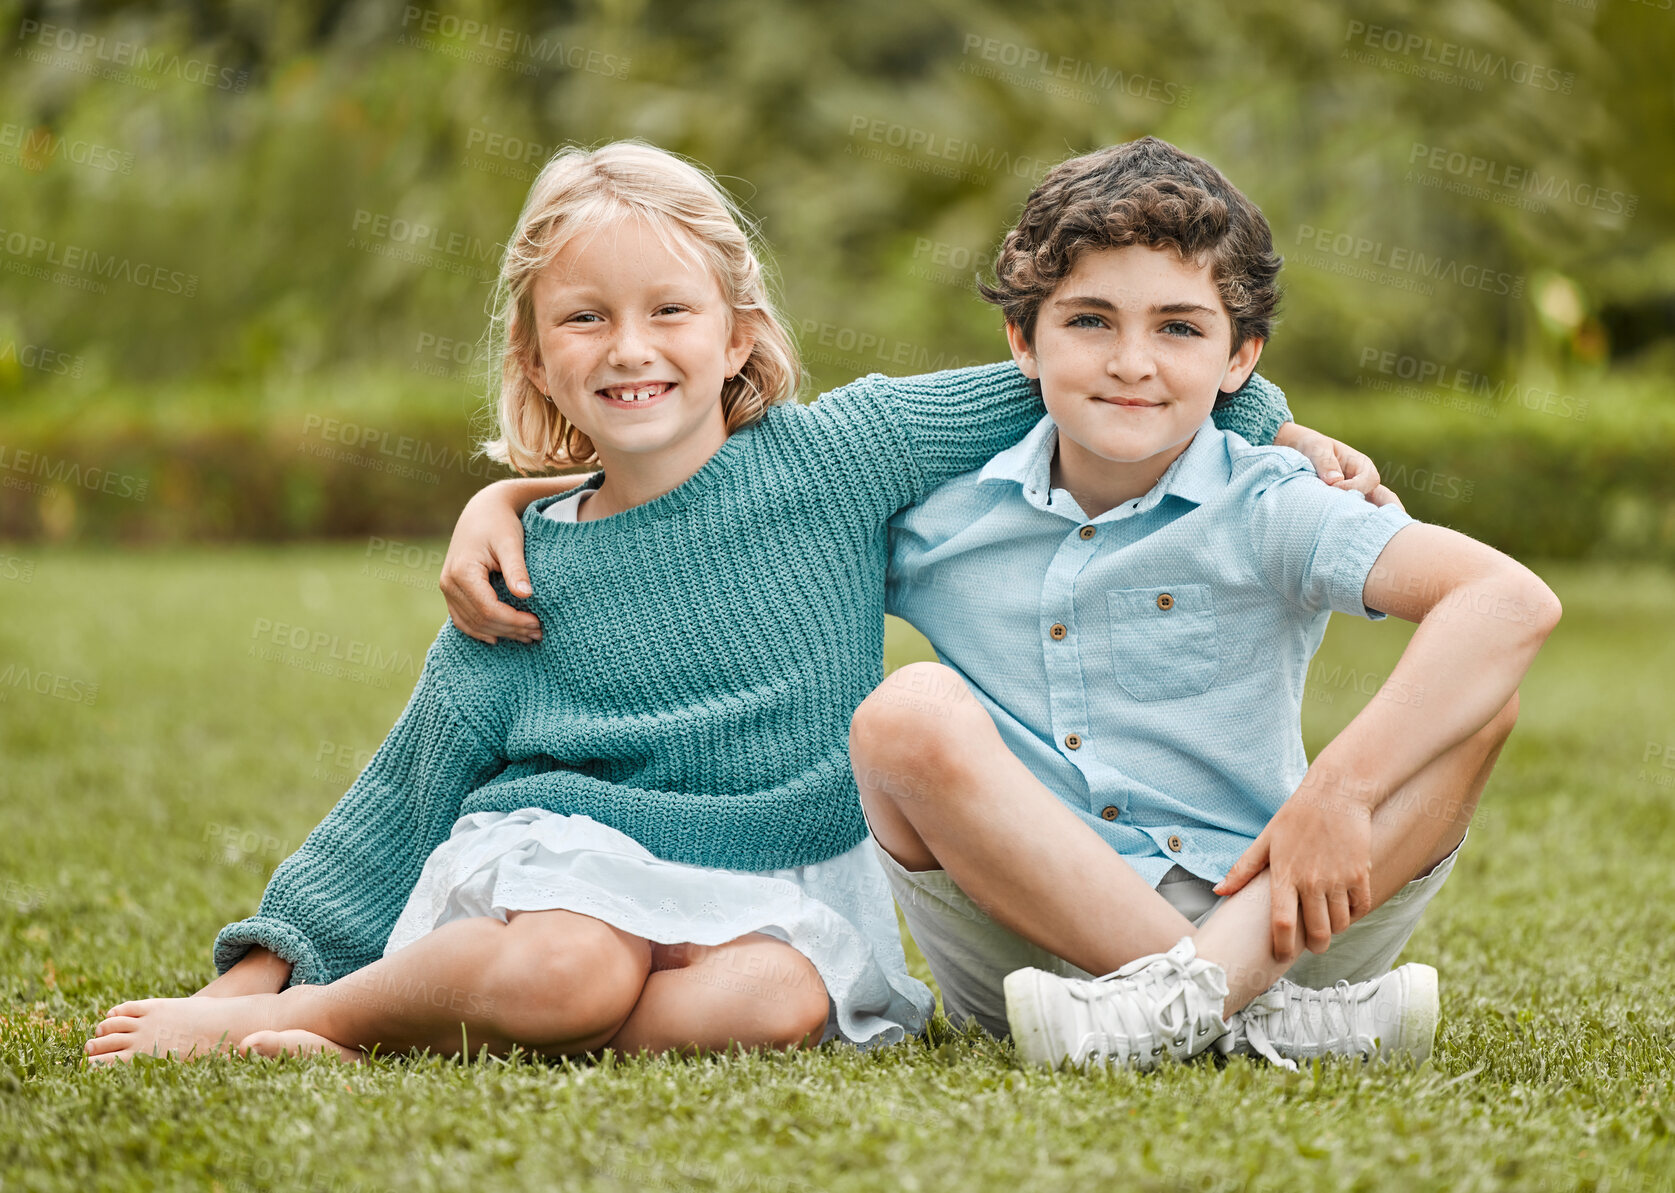 Buy stock photo Shot of an adorable little girl and boy sitting together outside